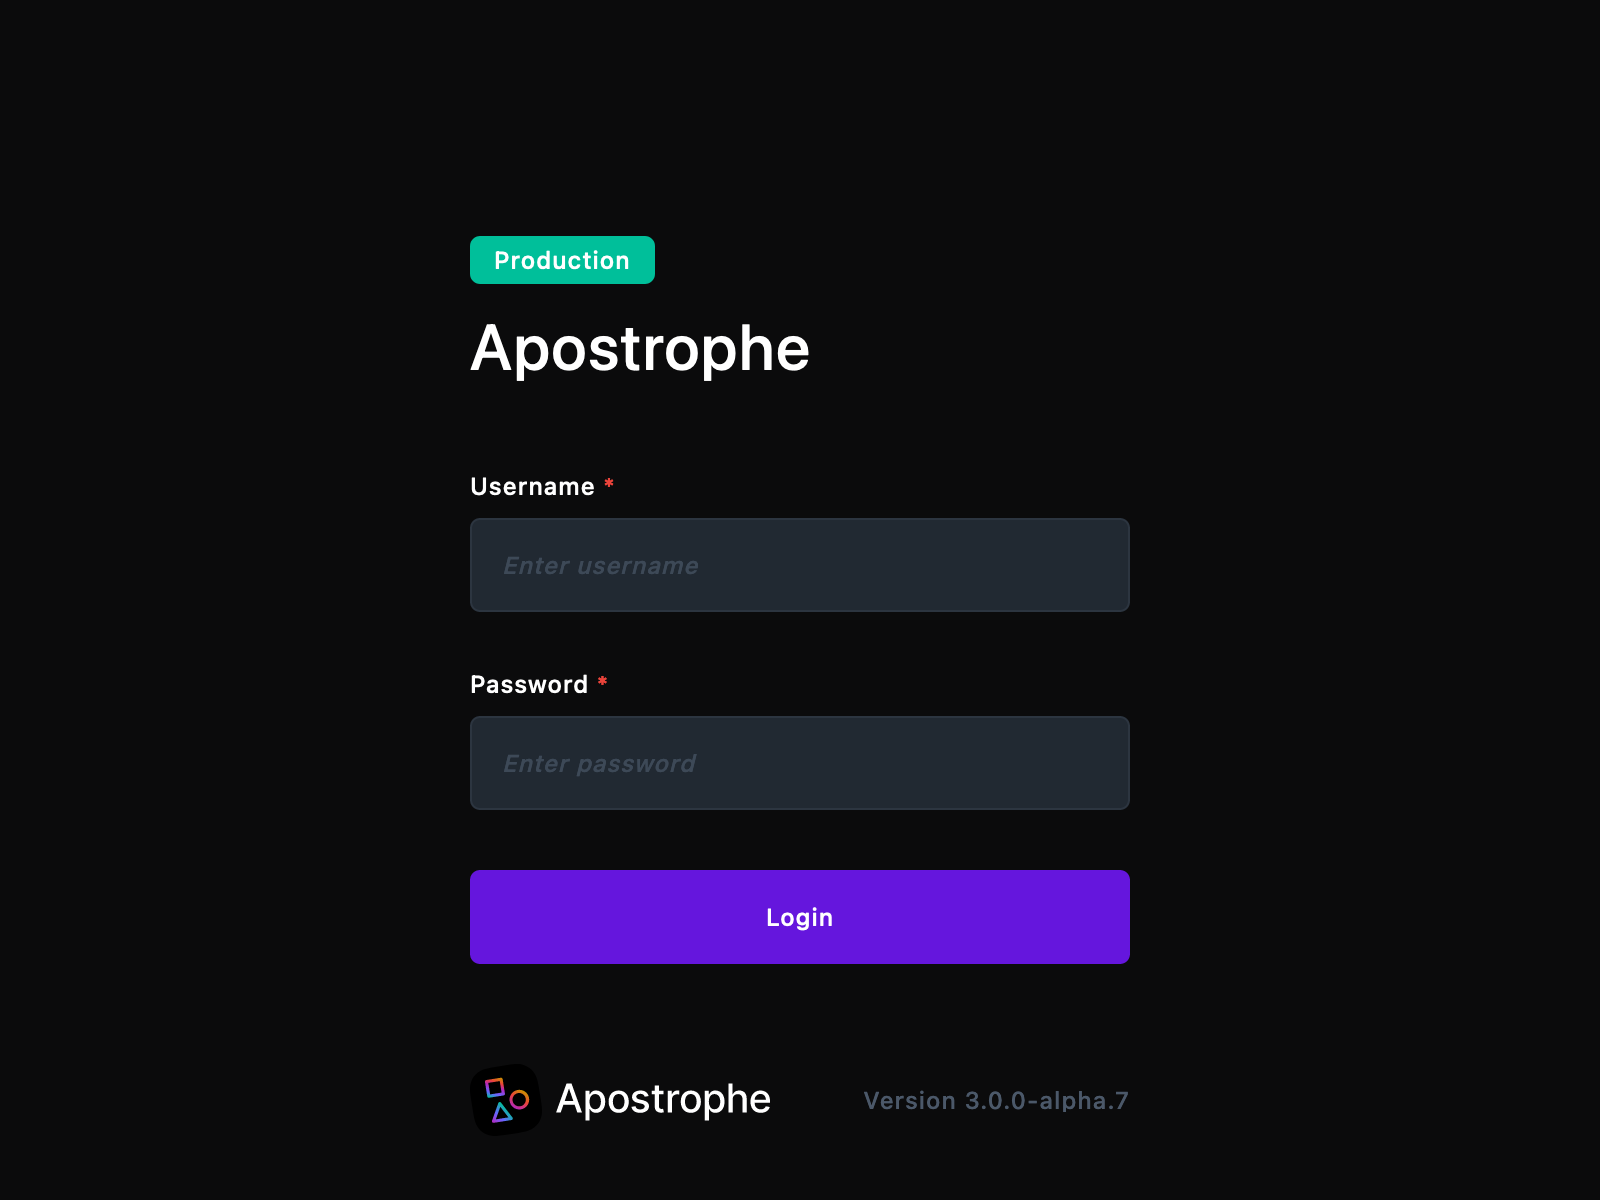 The Apostrophe login page with username and password fields